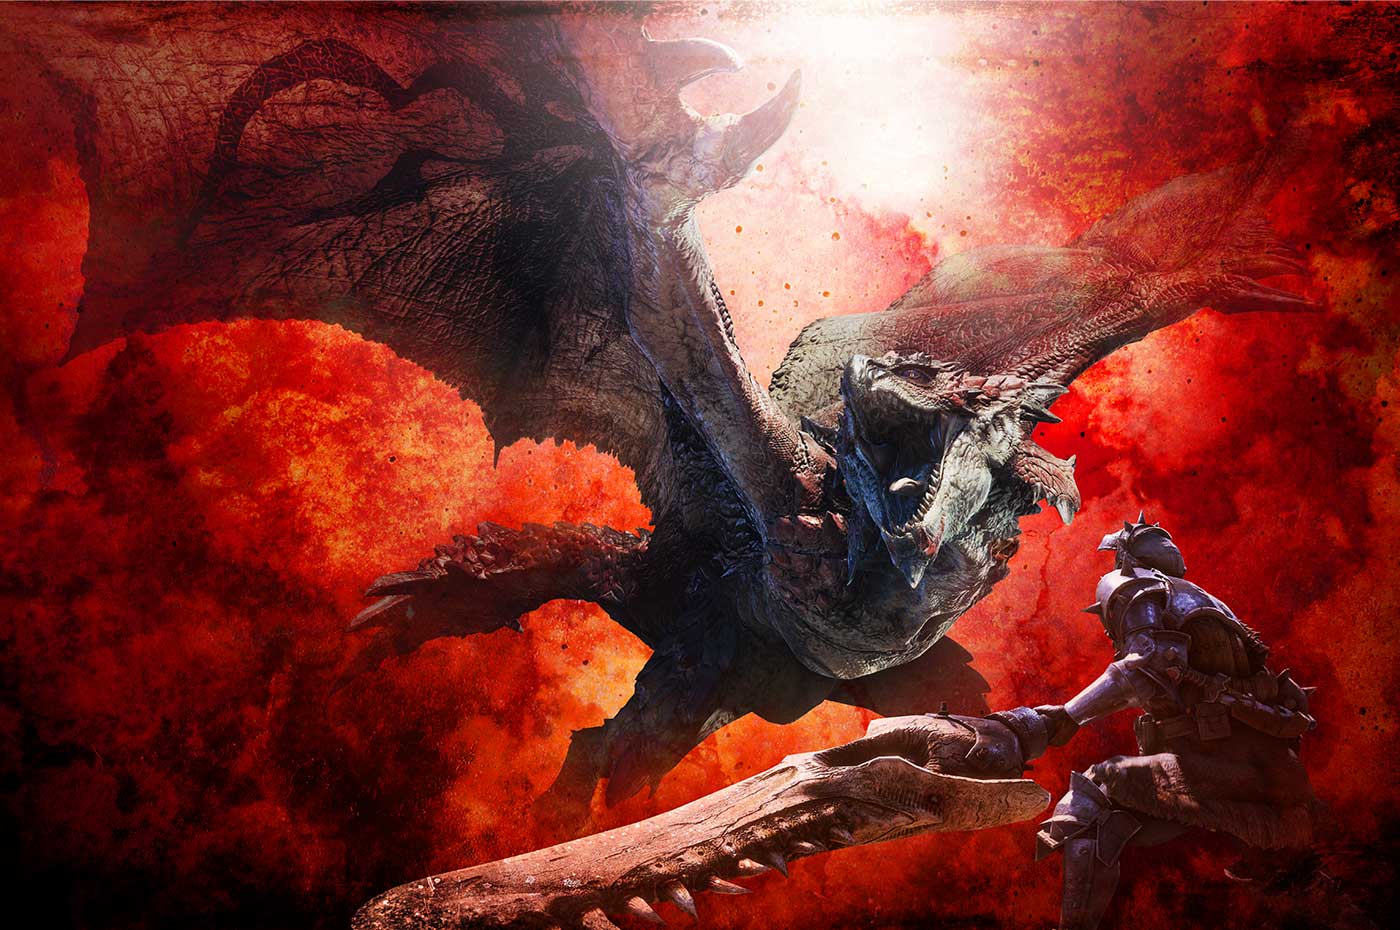 Official box art of Monster Hunter on the PS2 recreated for the 15th anniversary of Monster Hunter